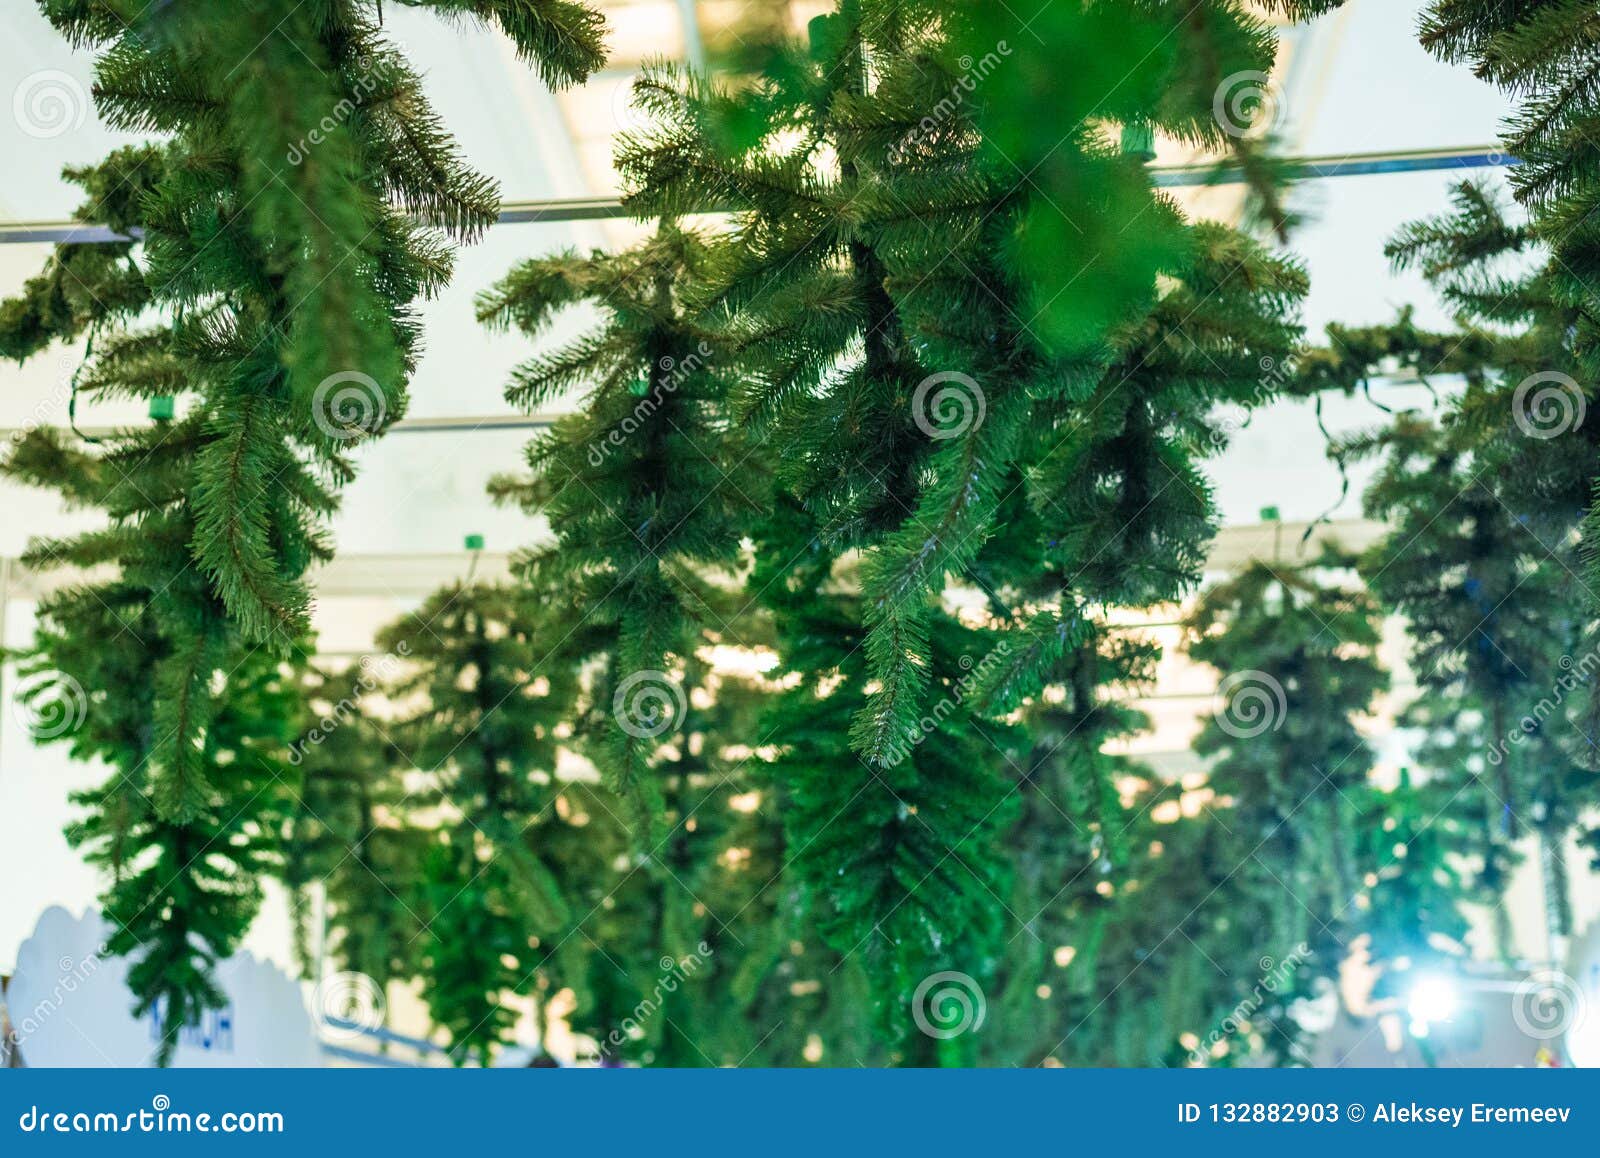 Branches Of The Christmas Tree Hang Upside Down On The Ceiling Stock Image Image Of Plant Frame 132882903,Why Is My Dog So Hyper After A Bath